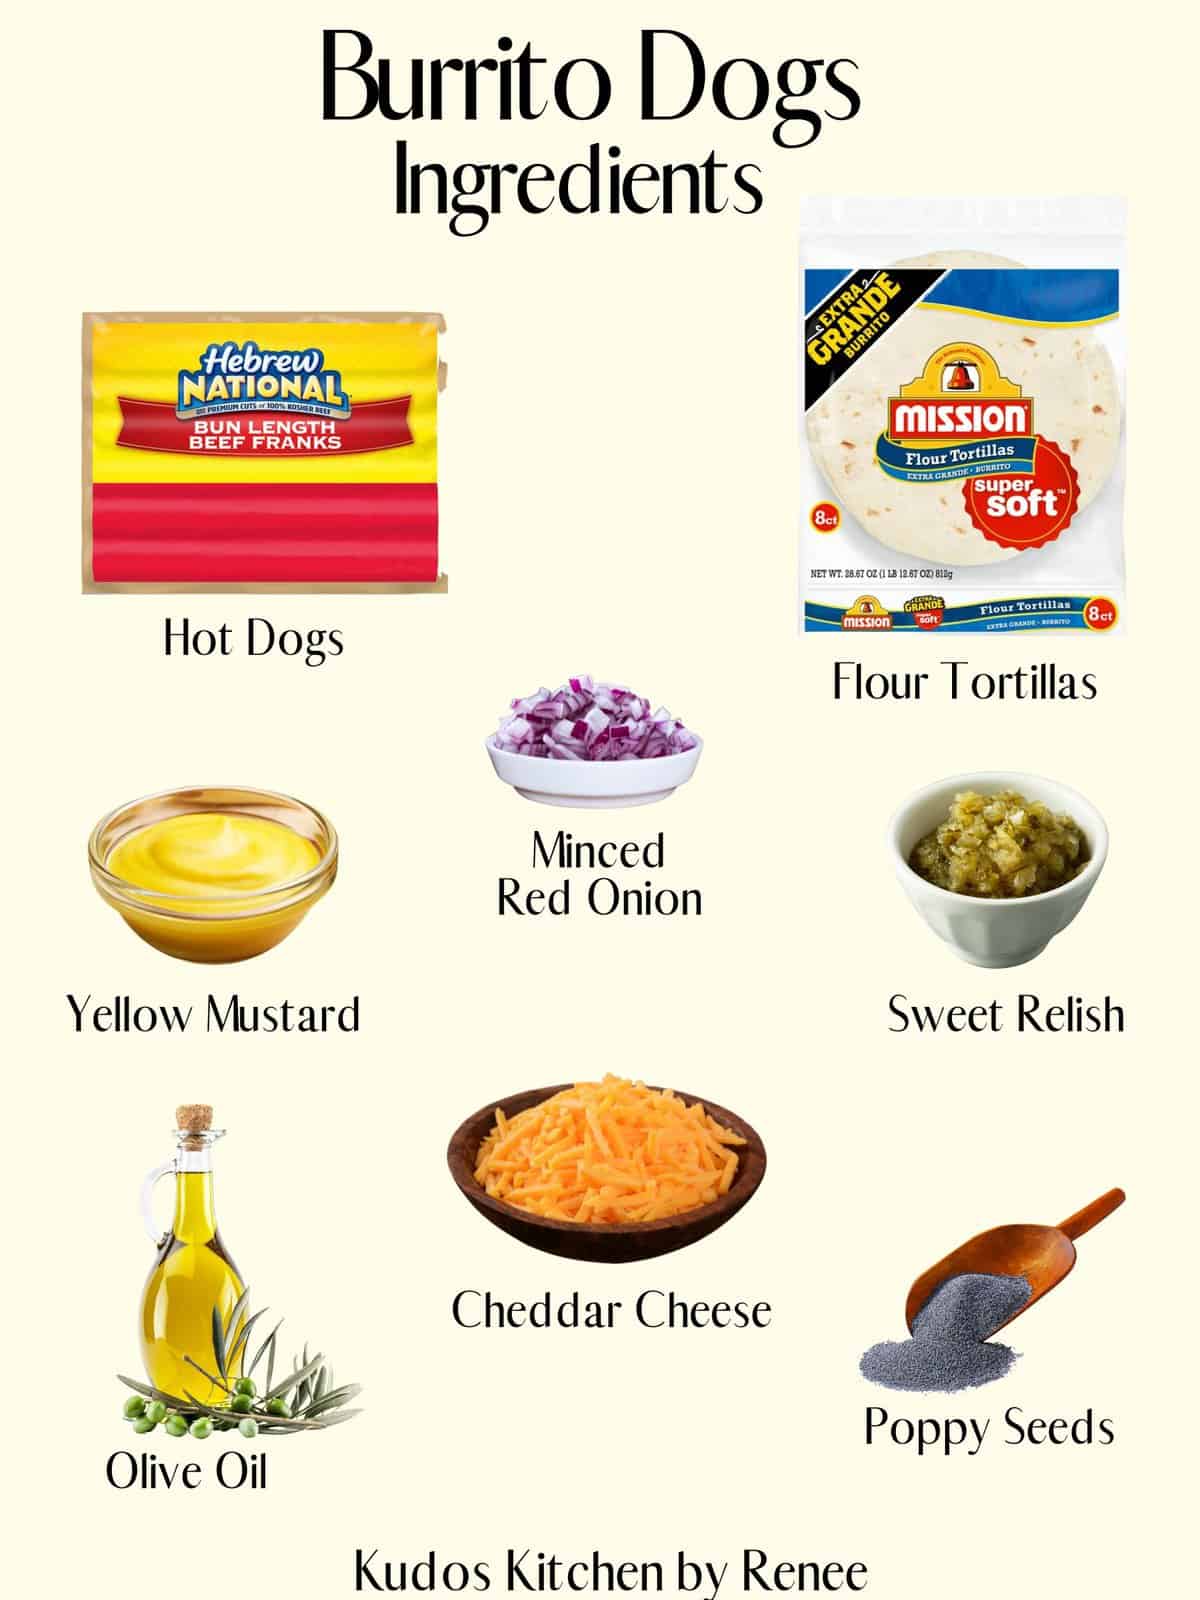 A visual ingredient list for making Burrito Dogs with tortillas and cheese.